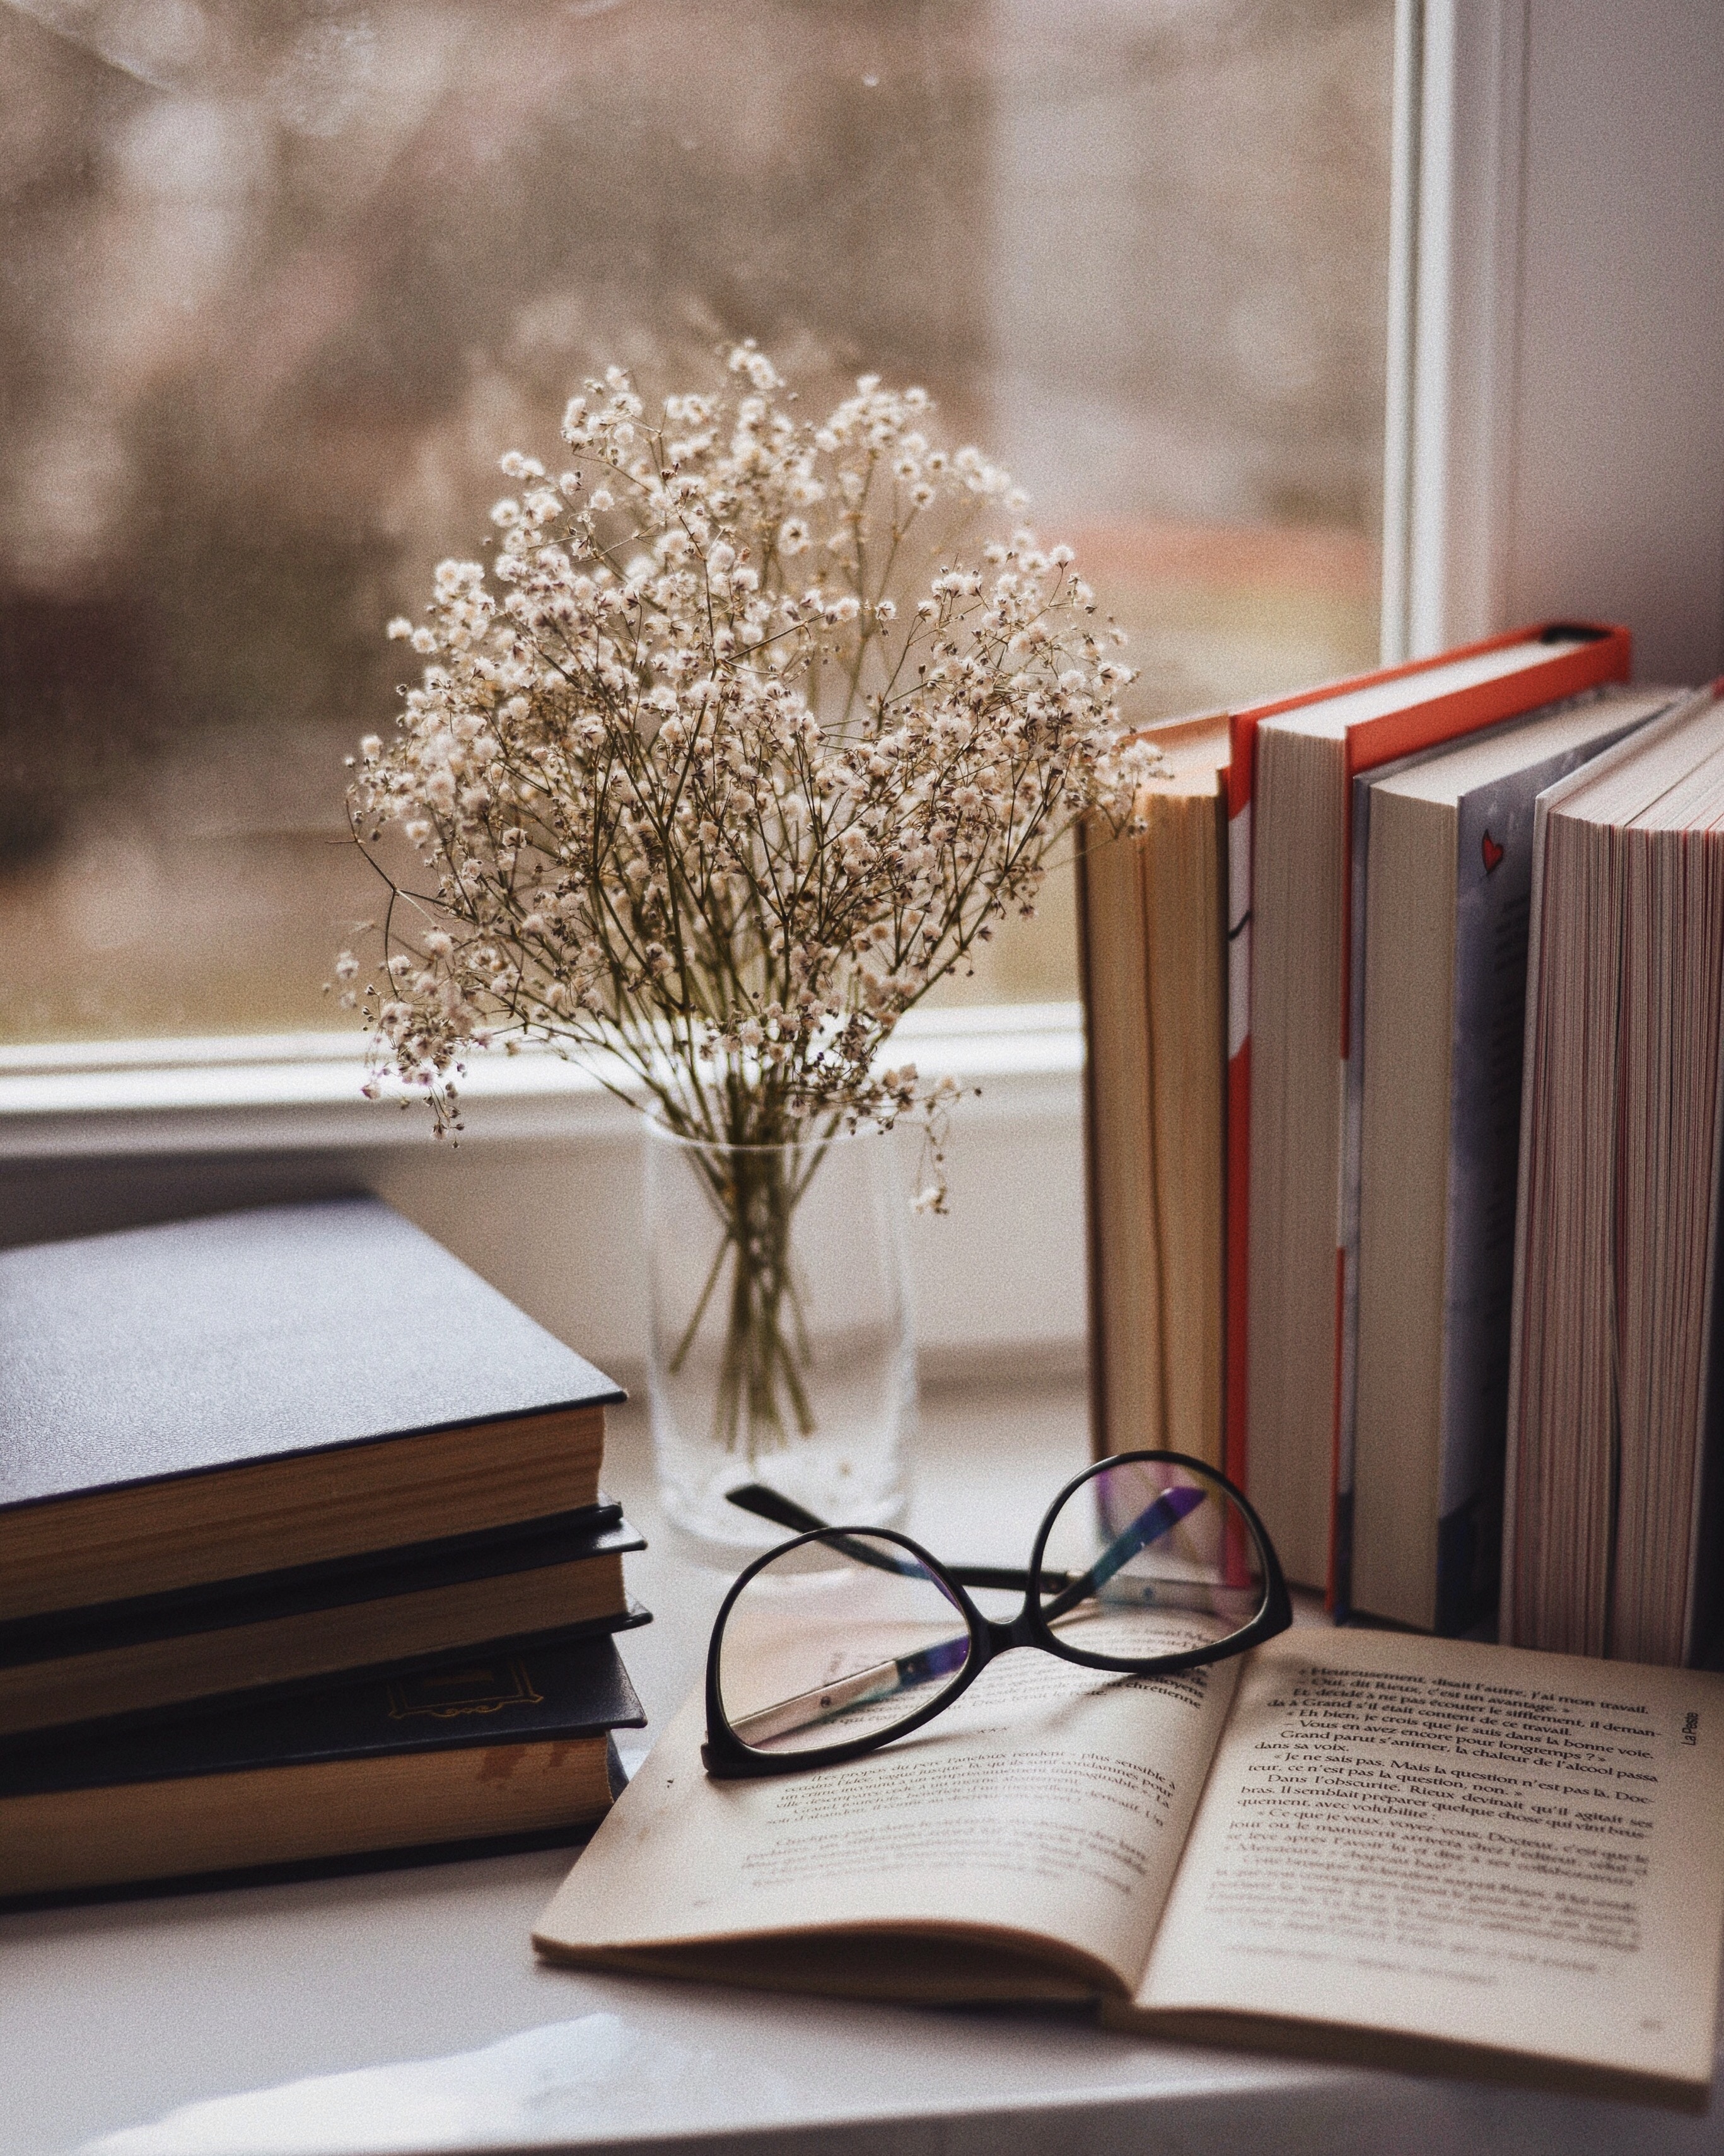 books, glasses, spectacles, flowers, miscellanea, miscellaneous, window, vase, window sill, windowsill Full HD